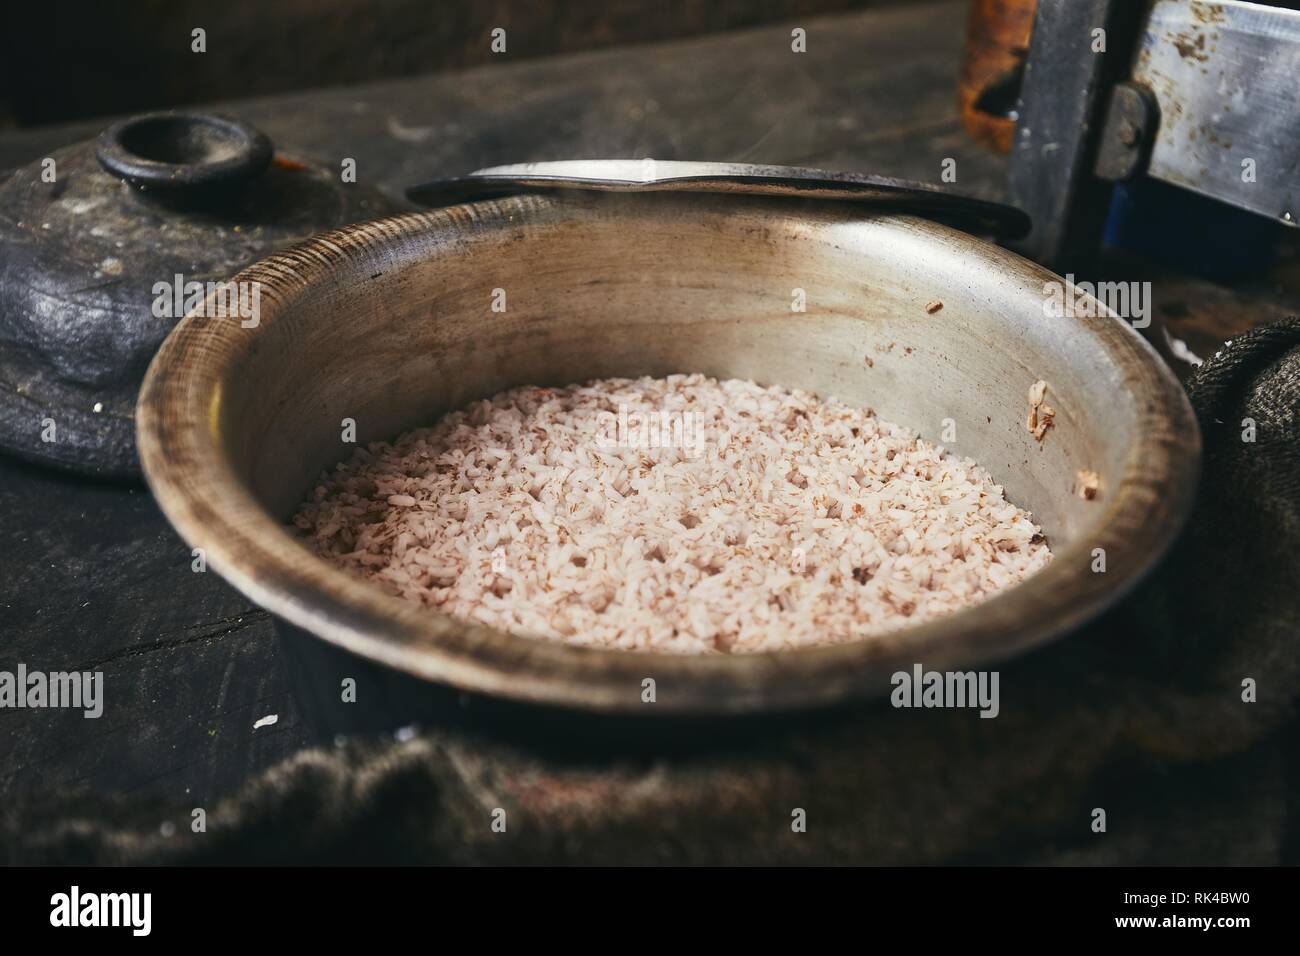 https://c8.alamy.com/comp/RK4BW0/bowl-of-rice-in-traditional-poor-home-kitchen-in-sri-lanka-RK4BW0.jpg